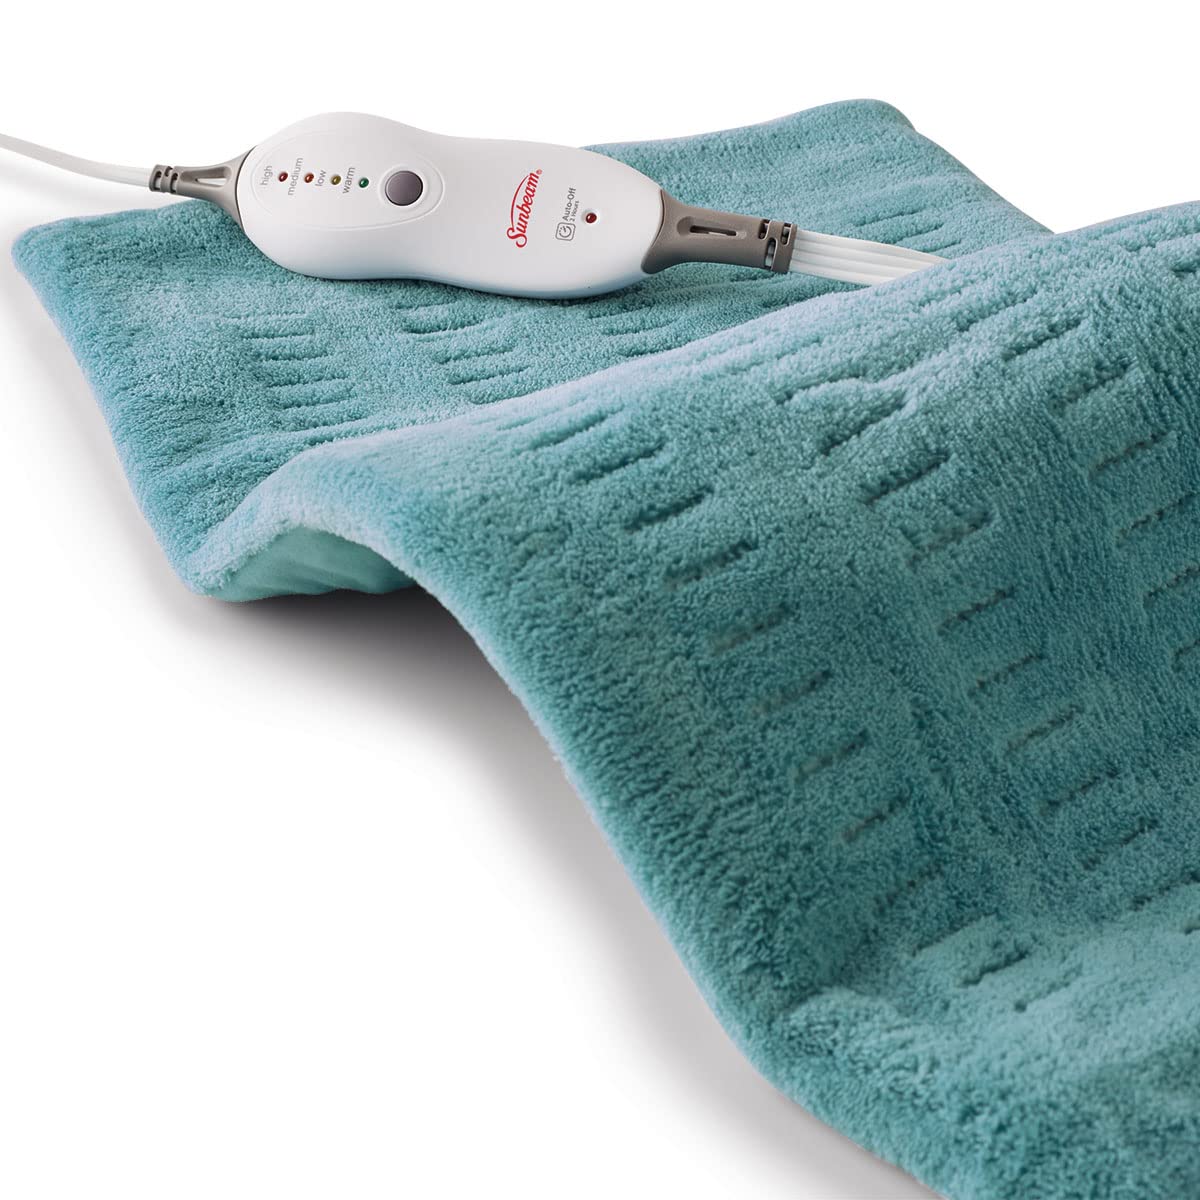 Sunbeam Heating Pad for Back, Neck, and Shoulder Pain Relief with Auto Shut Off, XL 12 x 24